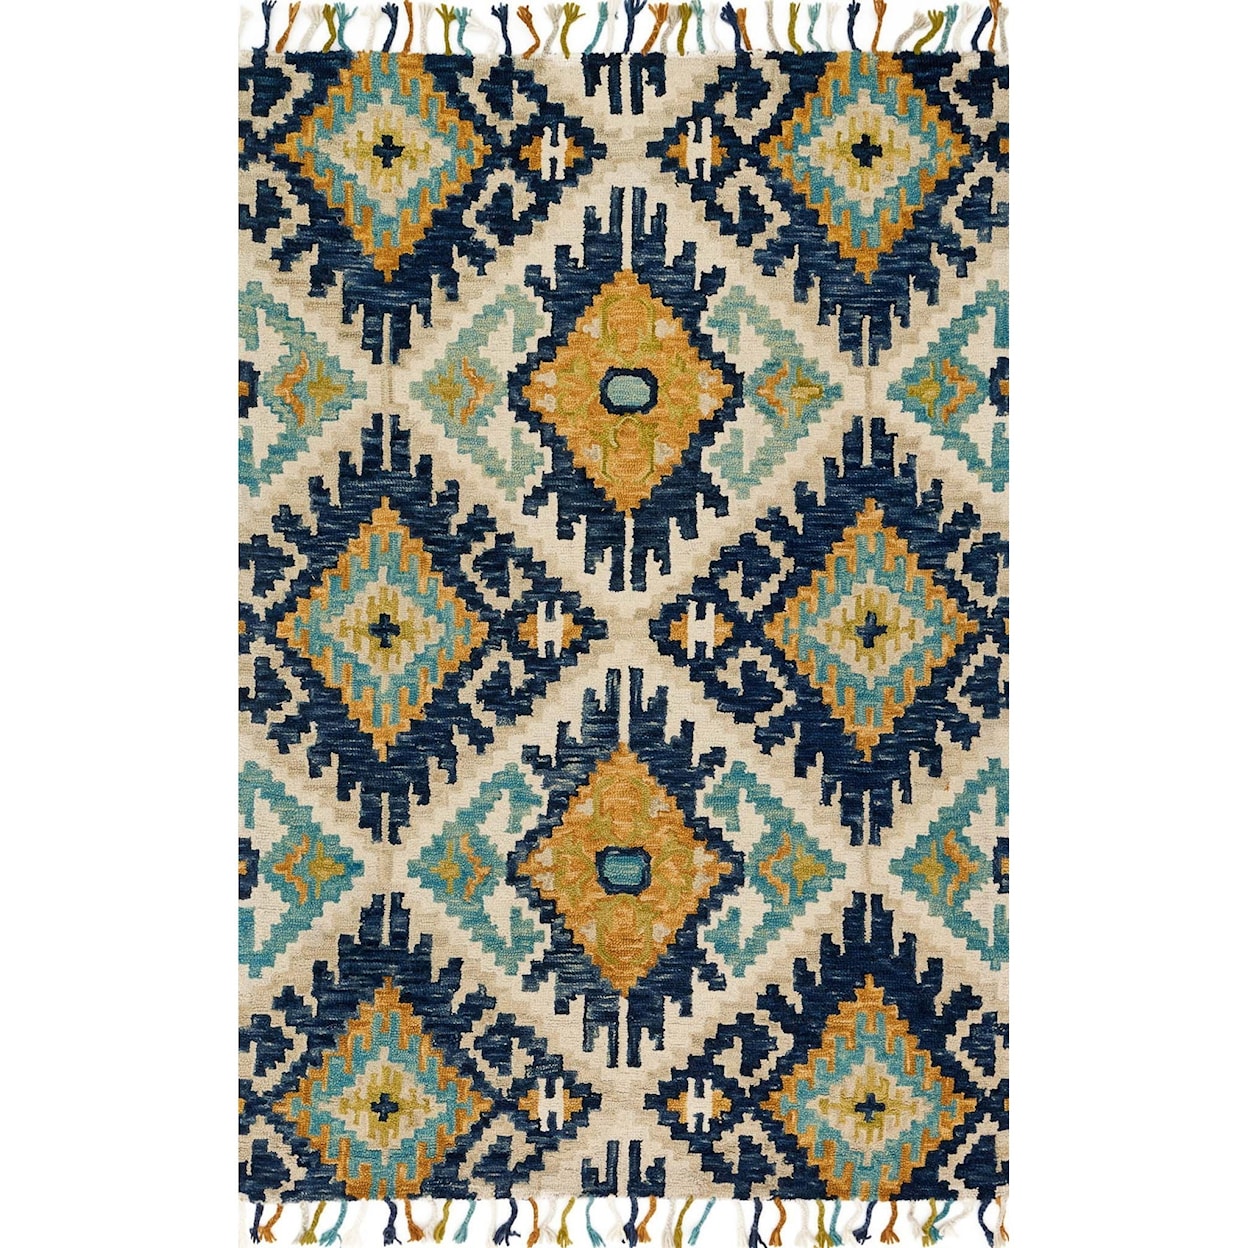 Magnolia Home by Joanna Gaines for Loloi Brushstroke 2' 3" x 3' 9" Rectangle Rug